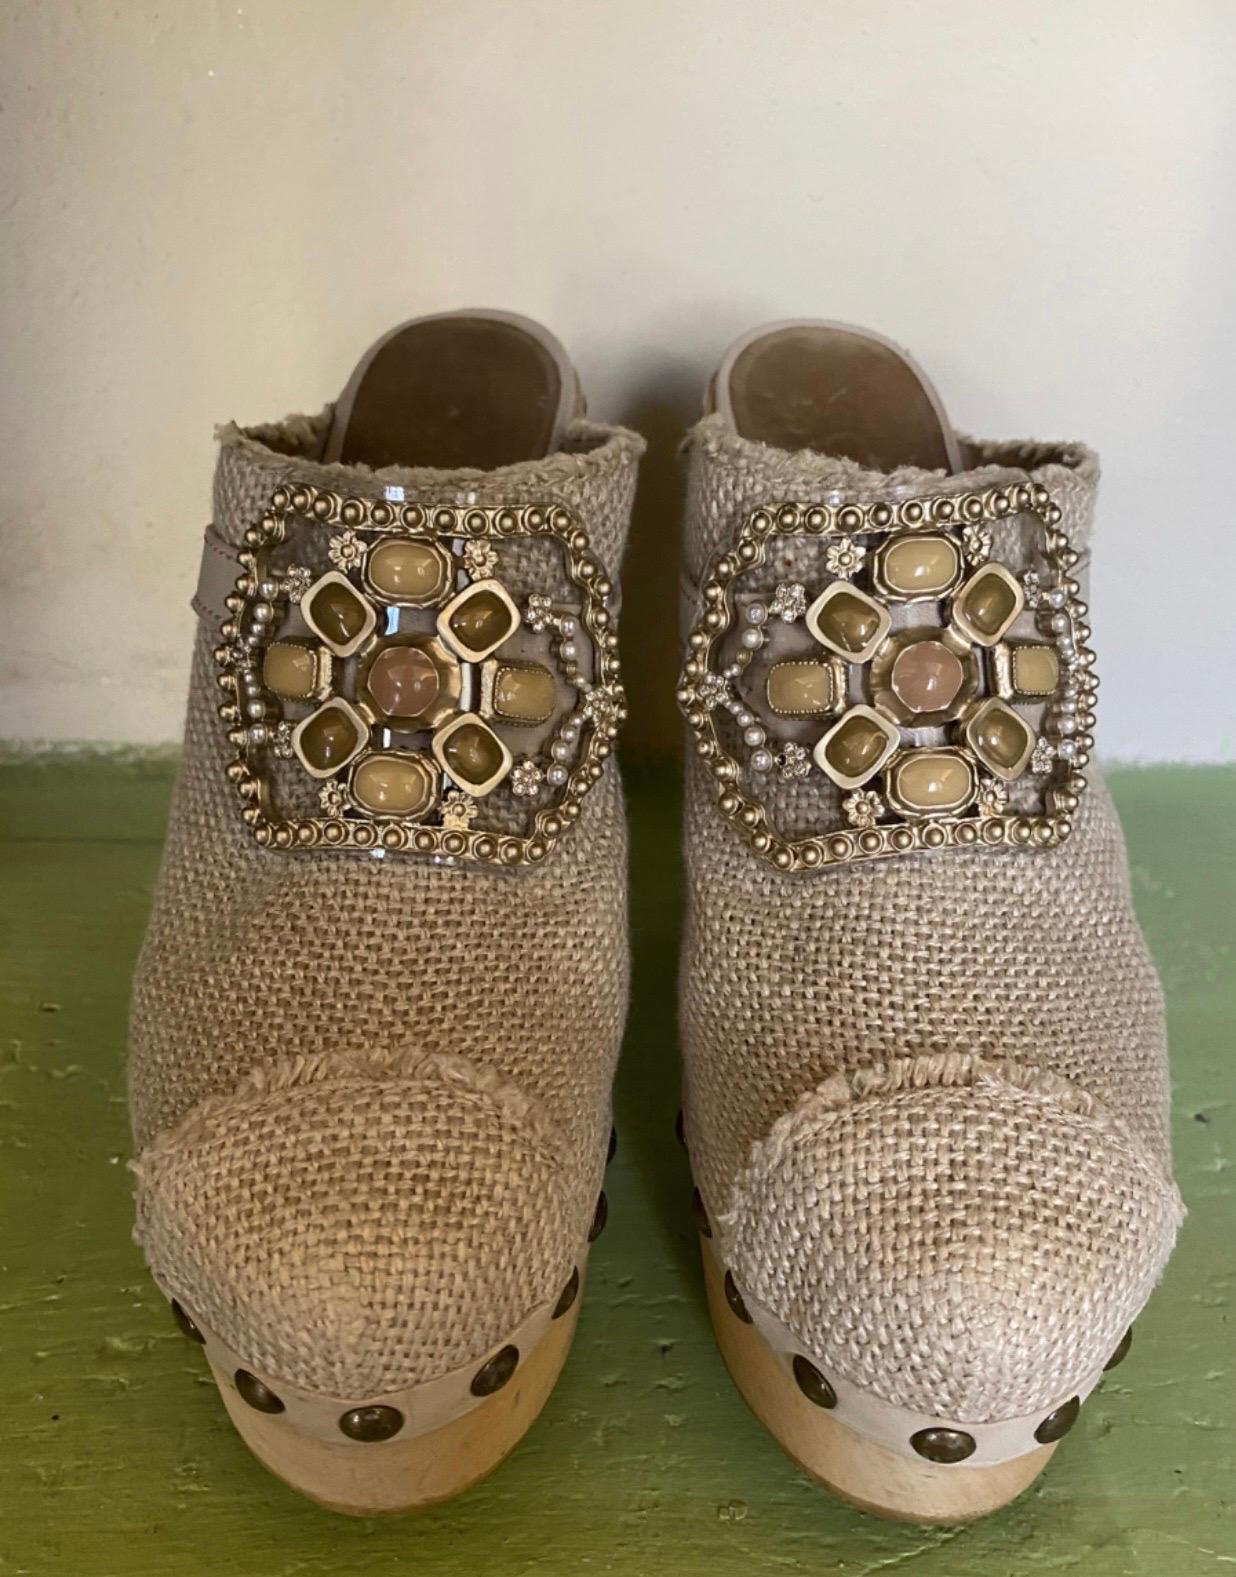 Chanel sabot, featuring wood wedges, beige-colored linen fabric , bronze-colored studs and Cabachon crystal pearls. it is Size 39, heel measures 14 cm, wedge measures 4 cm, in good condition, signs of wear as shown in the photos.